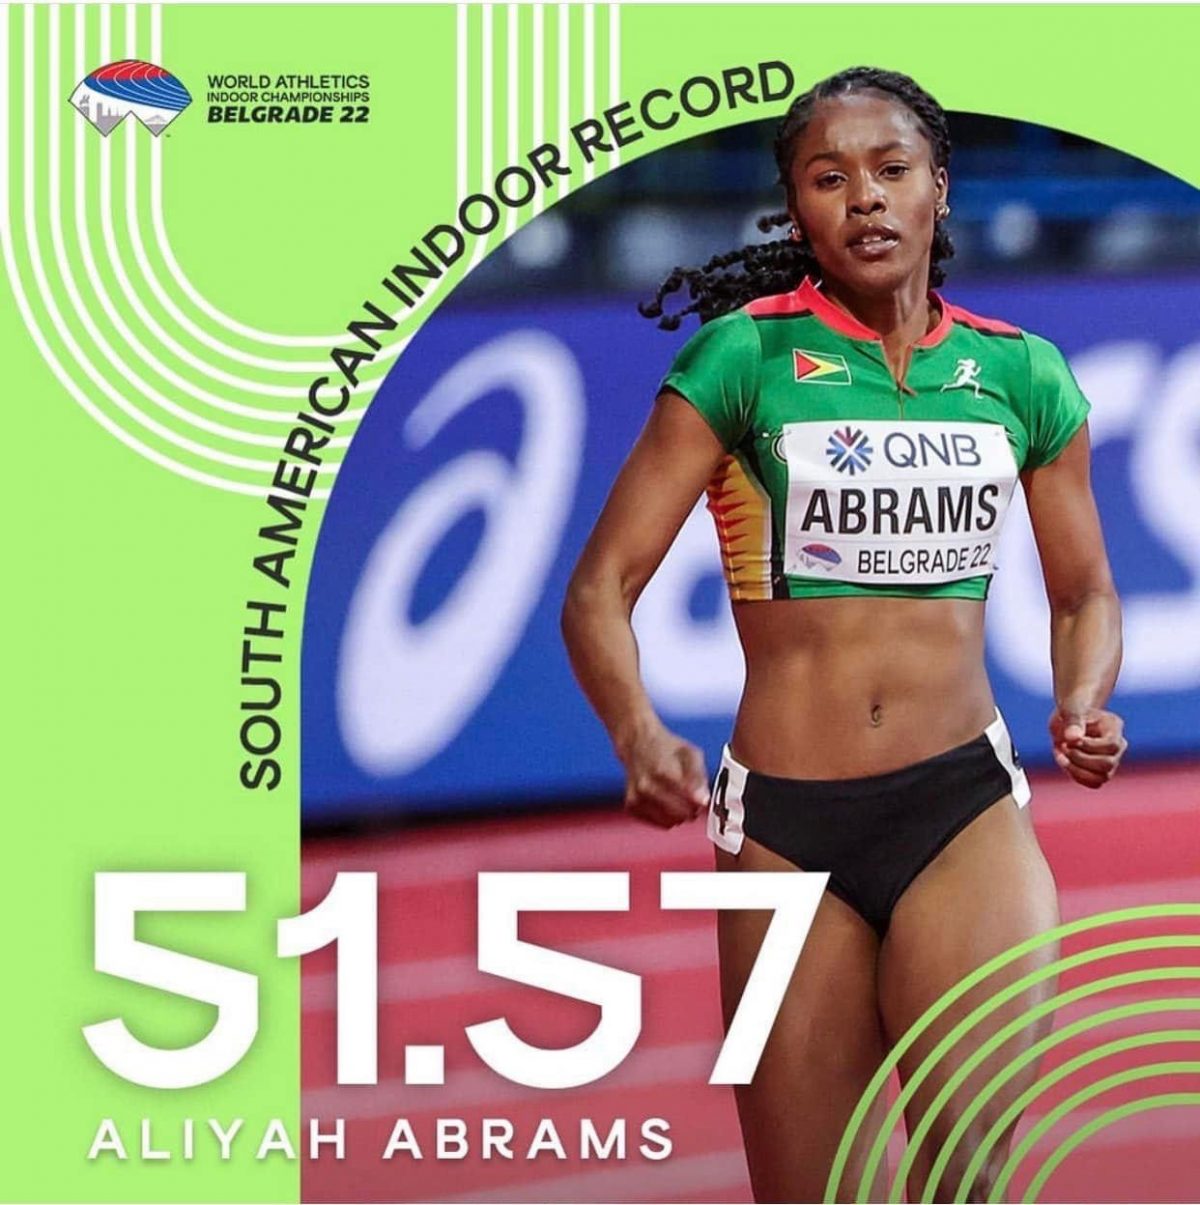 Aliyah Abrams is the new 400m record holder